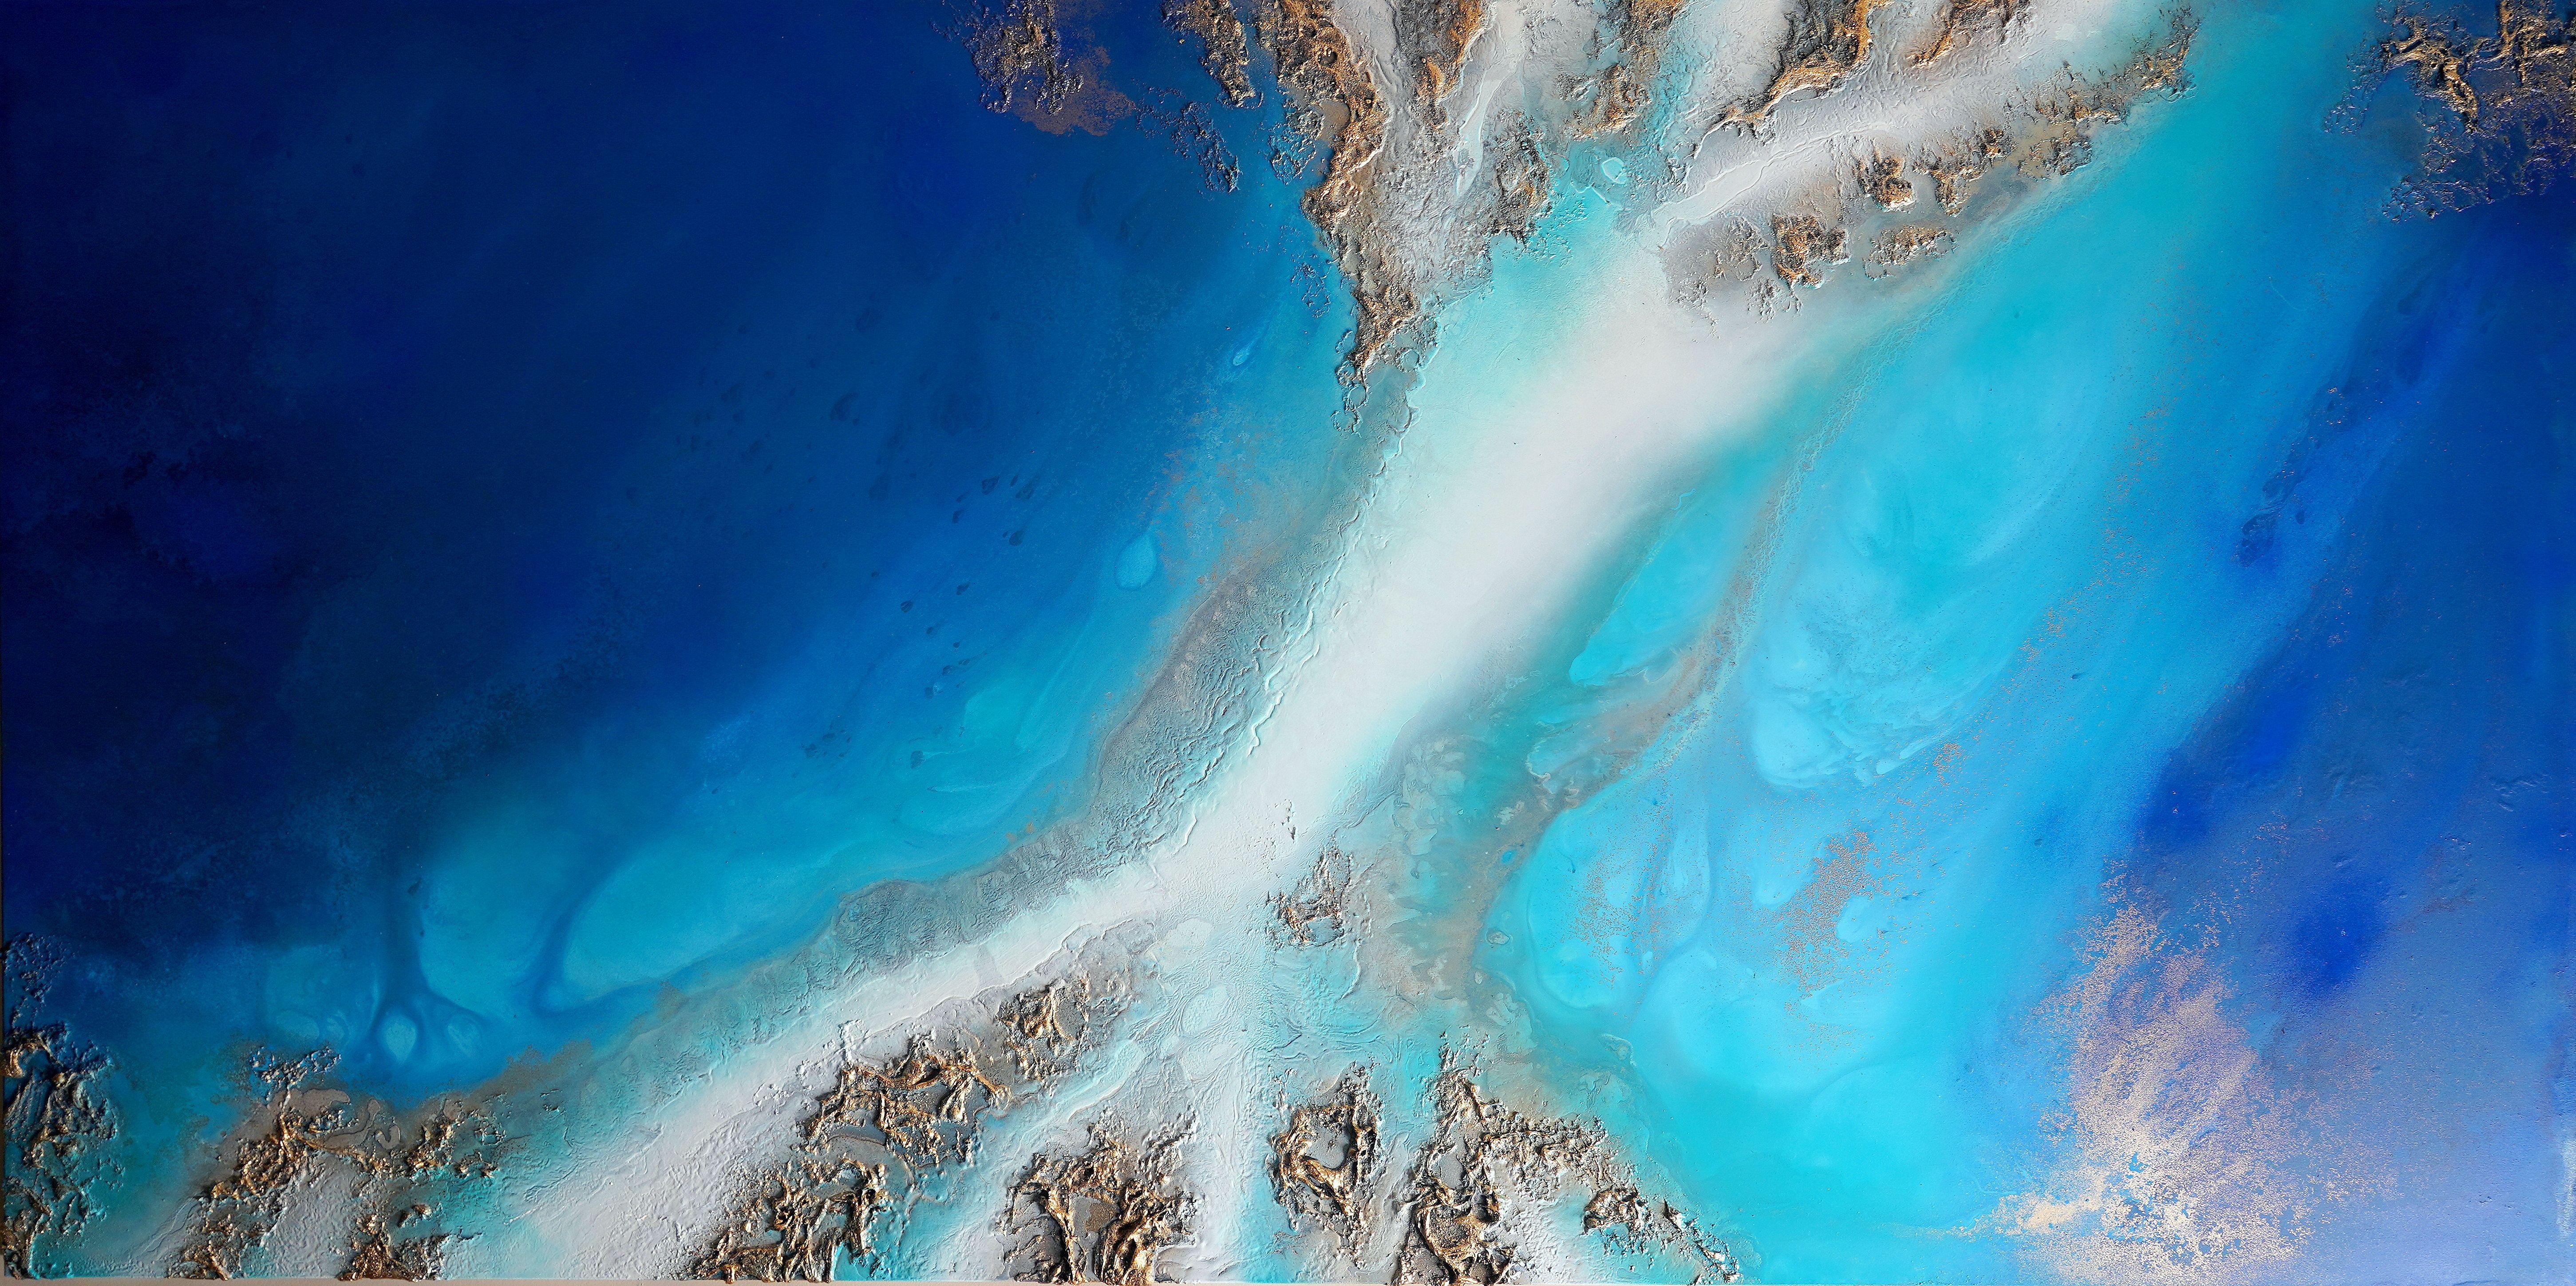 Sea of Secrets by Petra Meikle de Vlas is a 3 dimensional, aerial view of a patch on the Great Barrier Reef.    A mixed media fluid painting on a wooden panel.    This collection represents the effects of reactions between mixed mediums. The power